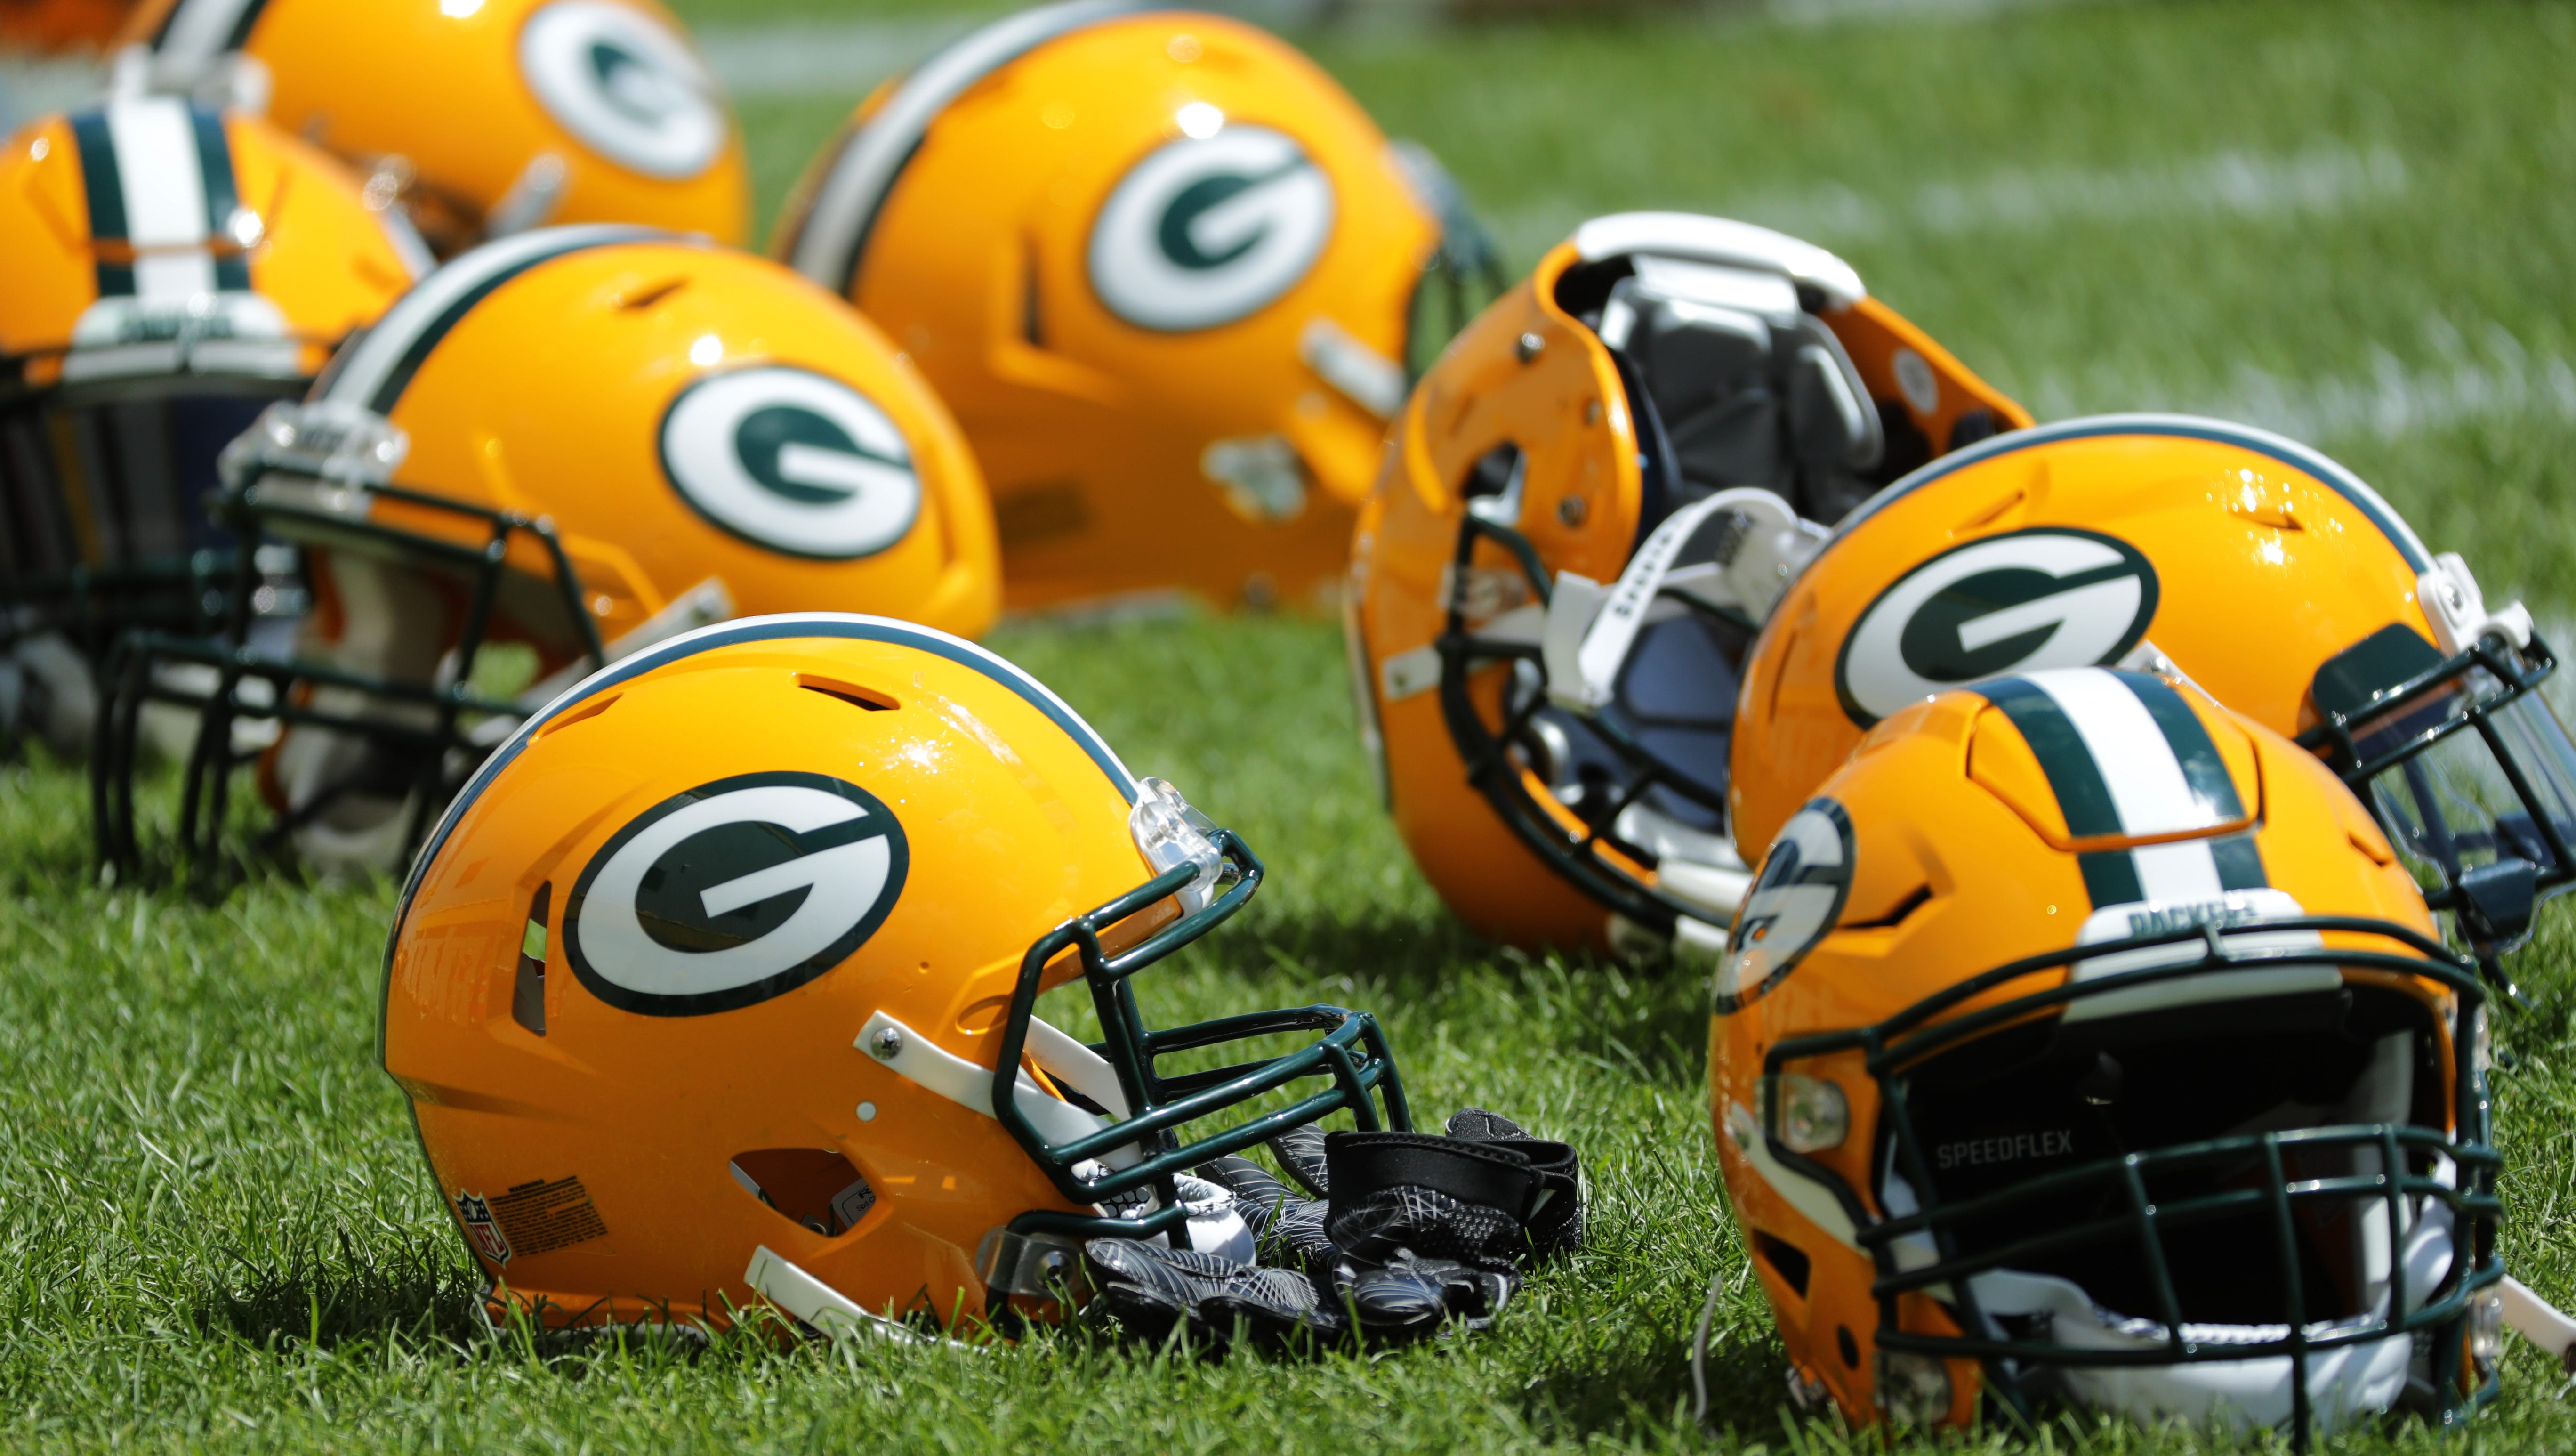 Green Bay Packers helmets are shown during organized team activities Monday, June 4, 2018 in Green Bay, Wis.